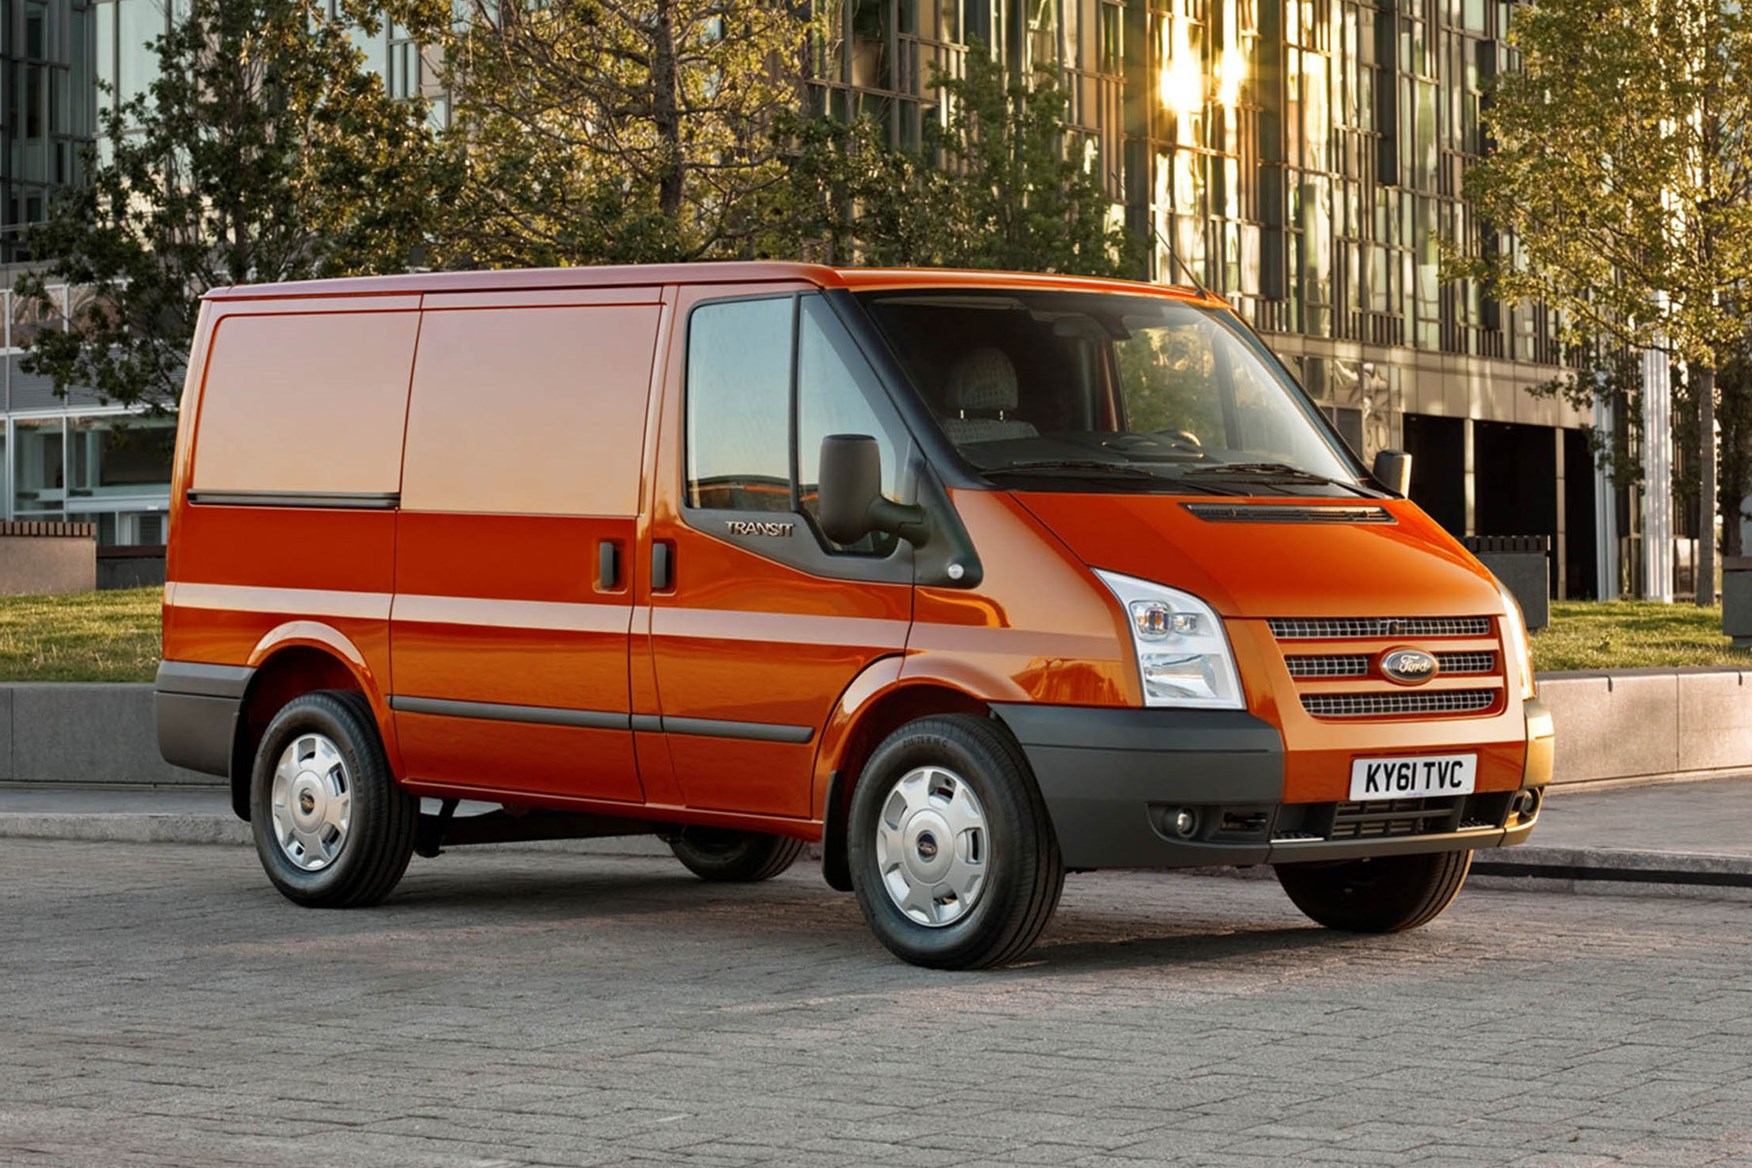 Ford Transit (2006 - 2013) used car review, Car review